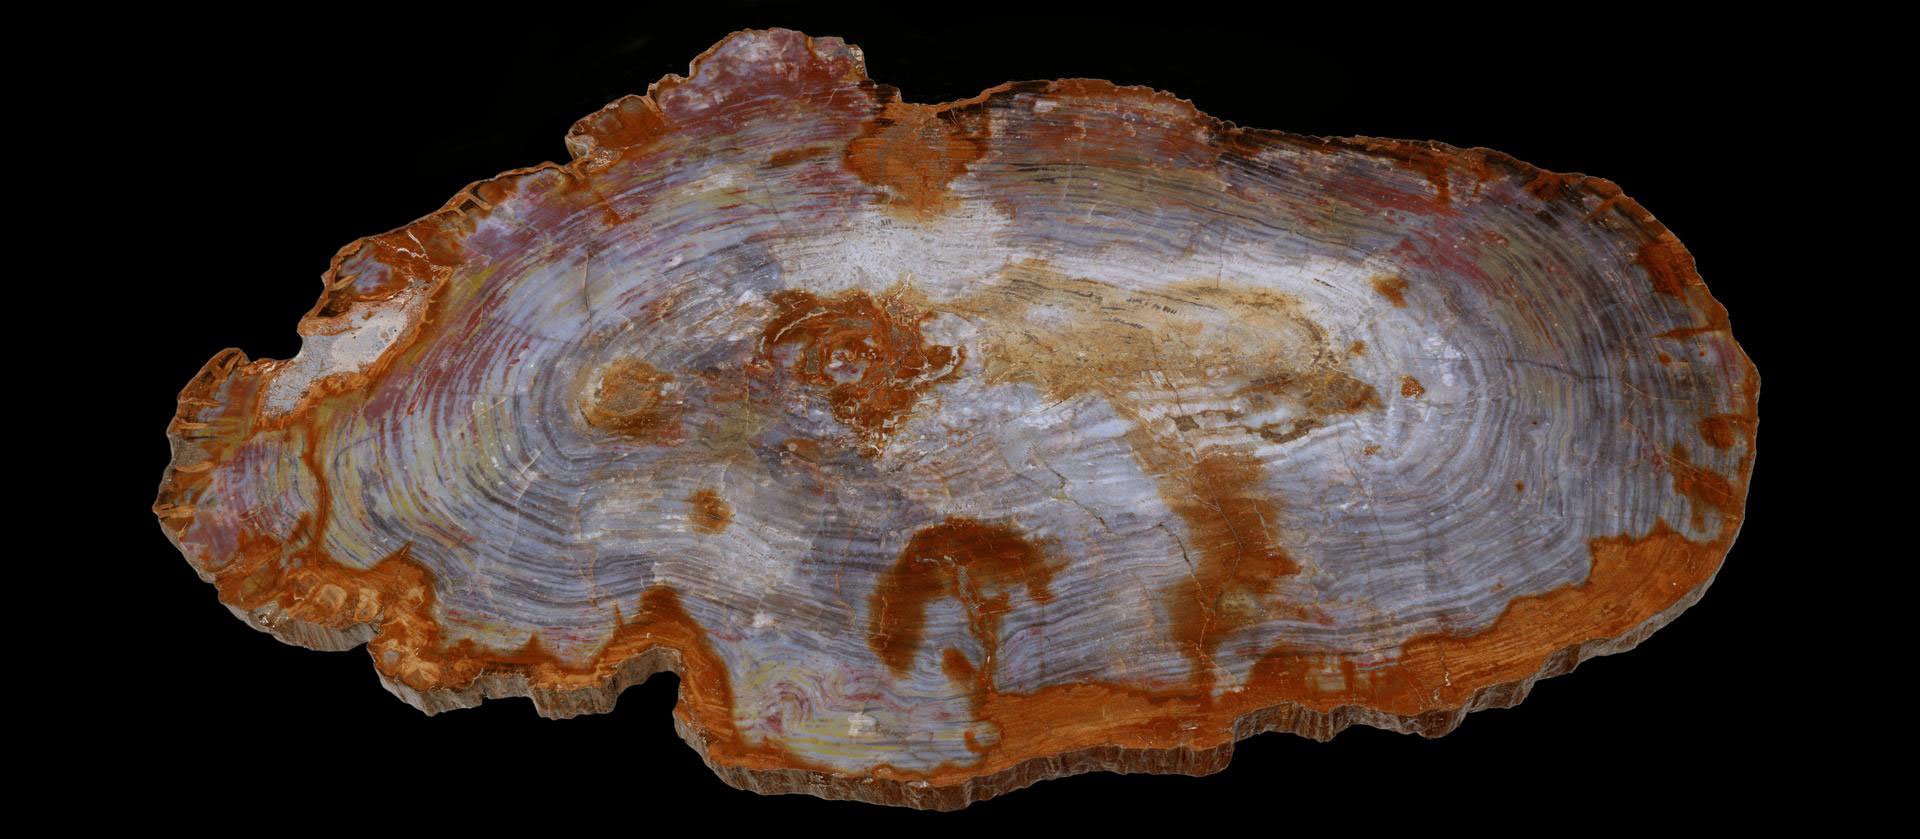 A cross section of a petrified conifer tree trunk. The periphery of the trunk is reddish-orange whereas the interior is grayish. Concentric growth rings are clearly visible.